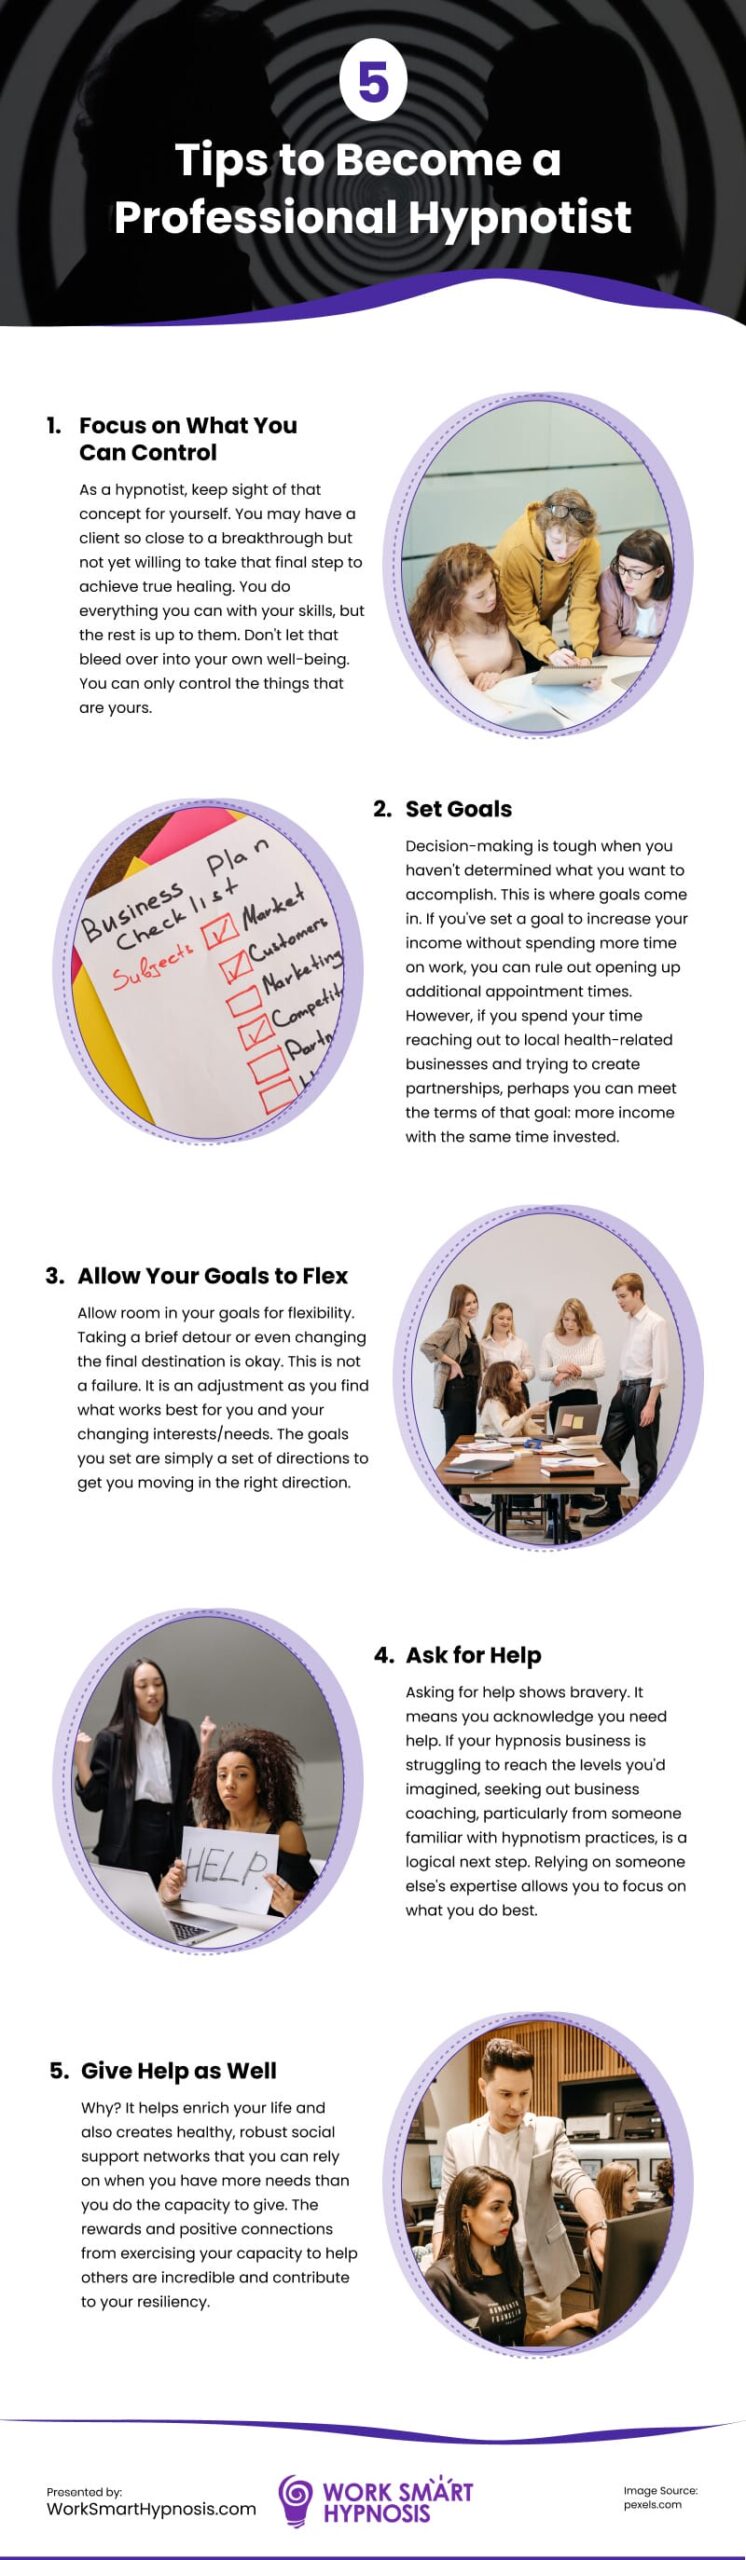 5 Tips To Become a Professional Hypnotist Infographic